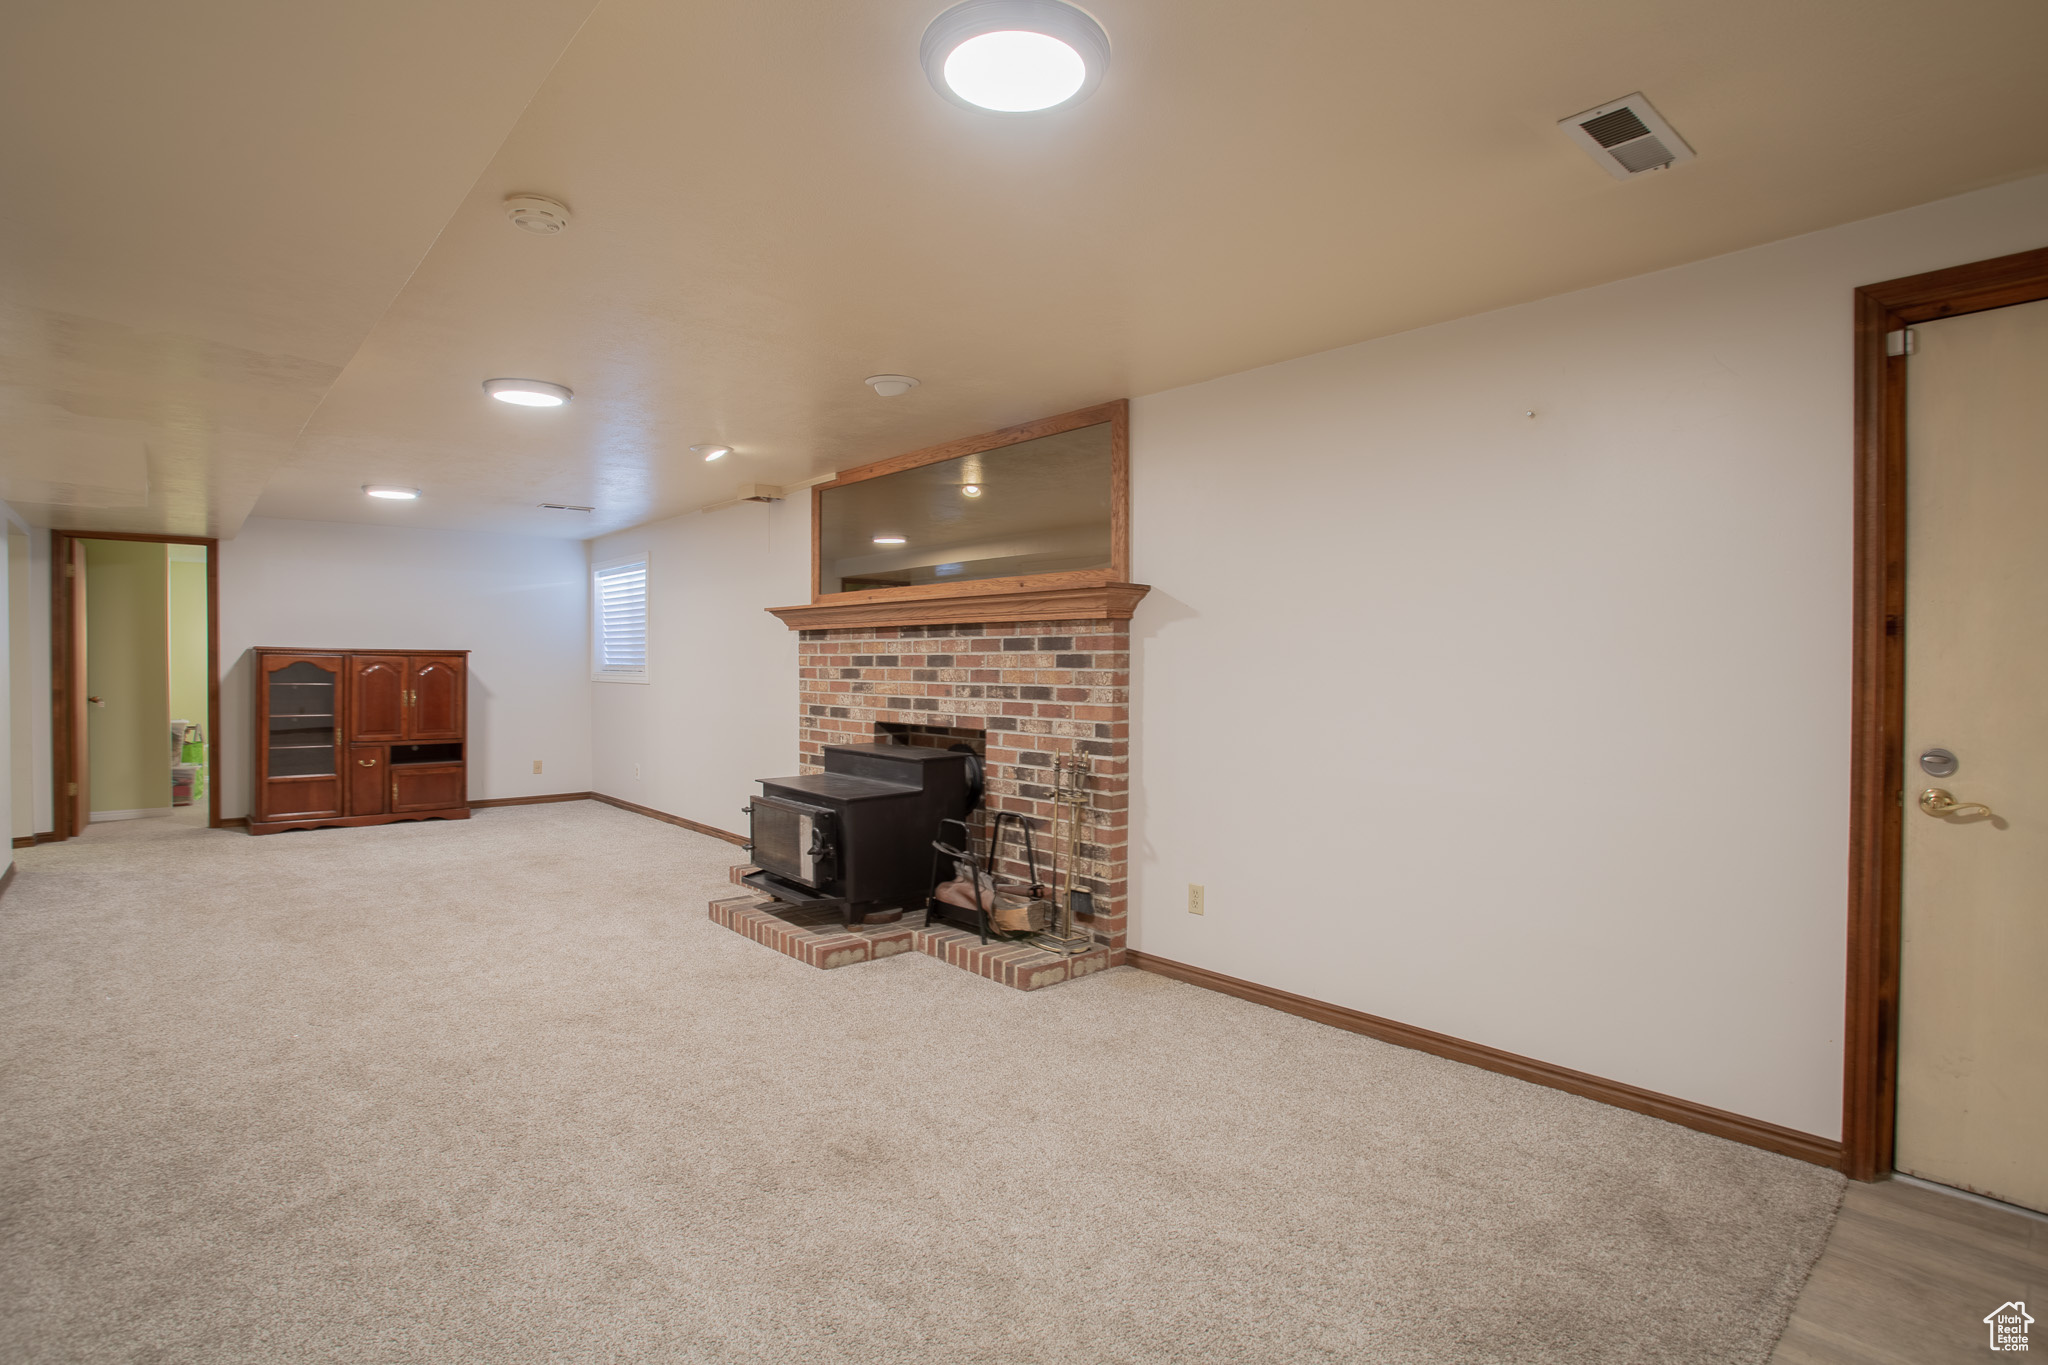 Unfurnished living room featuring light colored carpet, a fireplace, and a wood stove